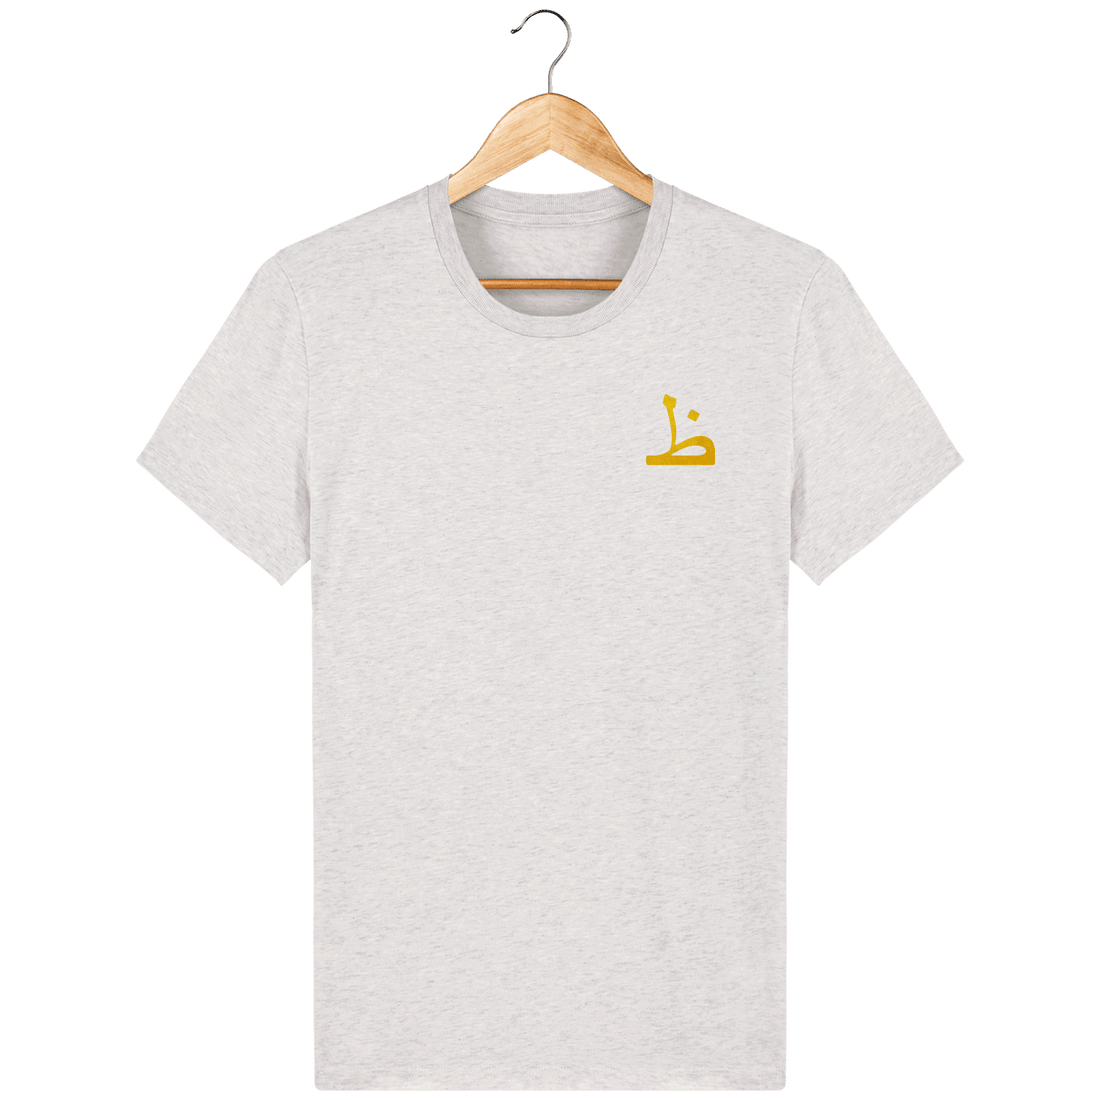 Unisexe>Tee-shirts - T-Shirt Homme <br> Lettre Arabe Thaa